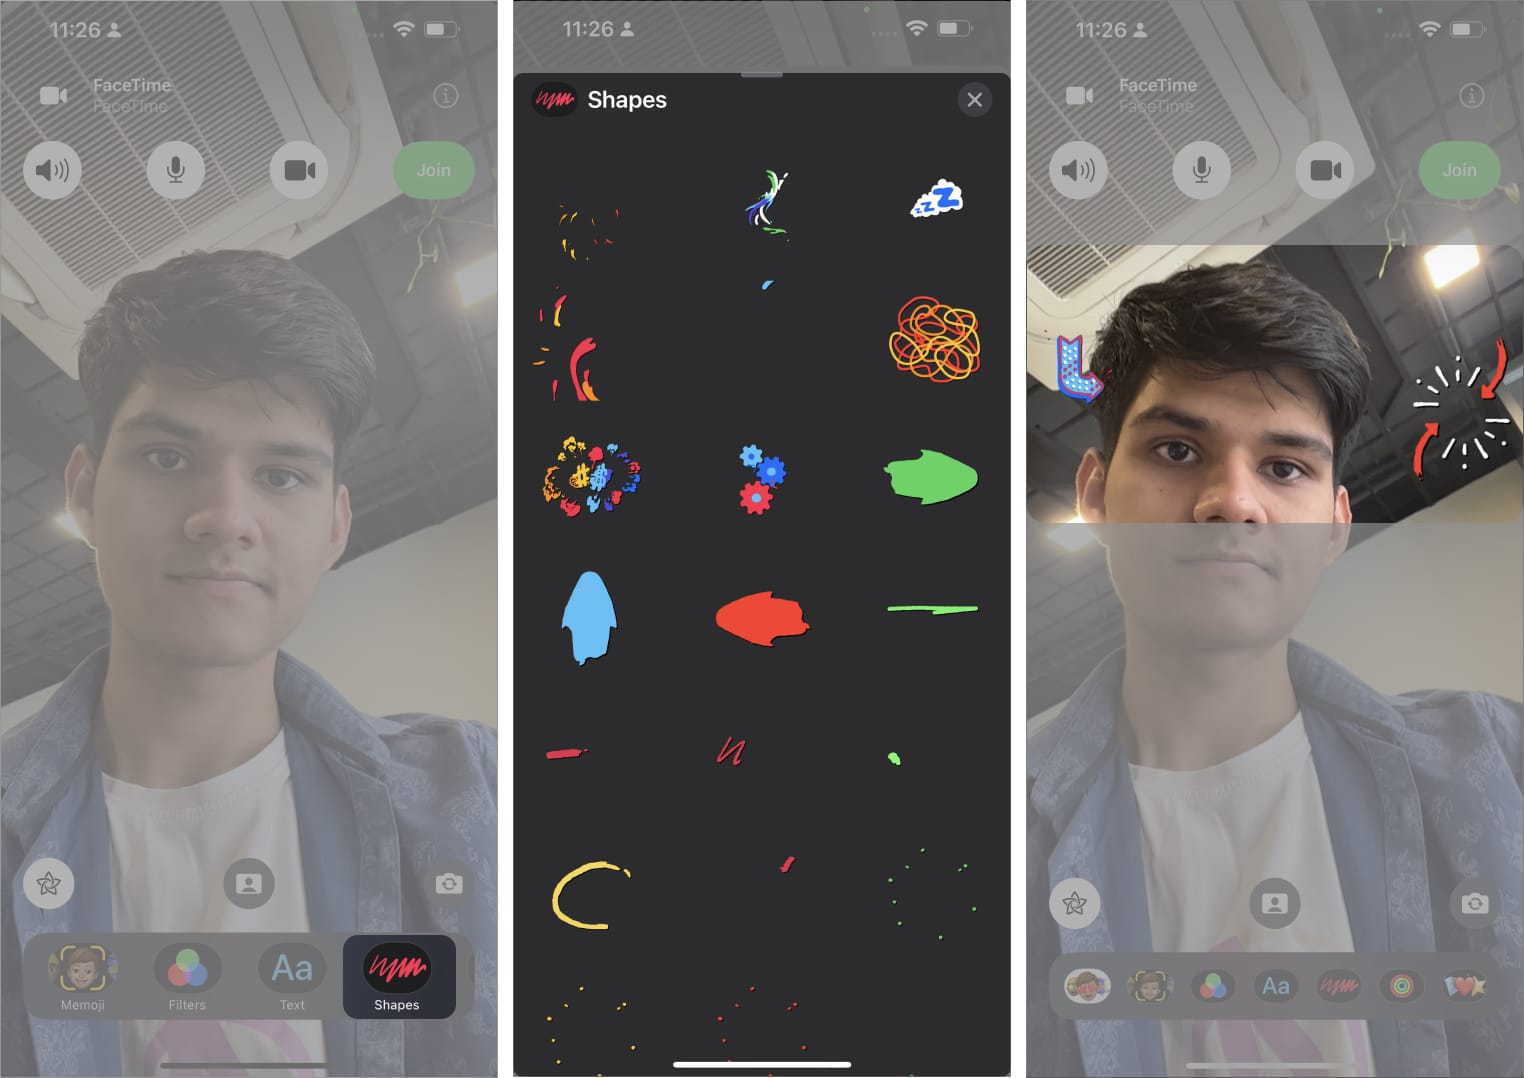 How to add shapes to a FaceTime video call